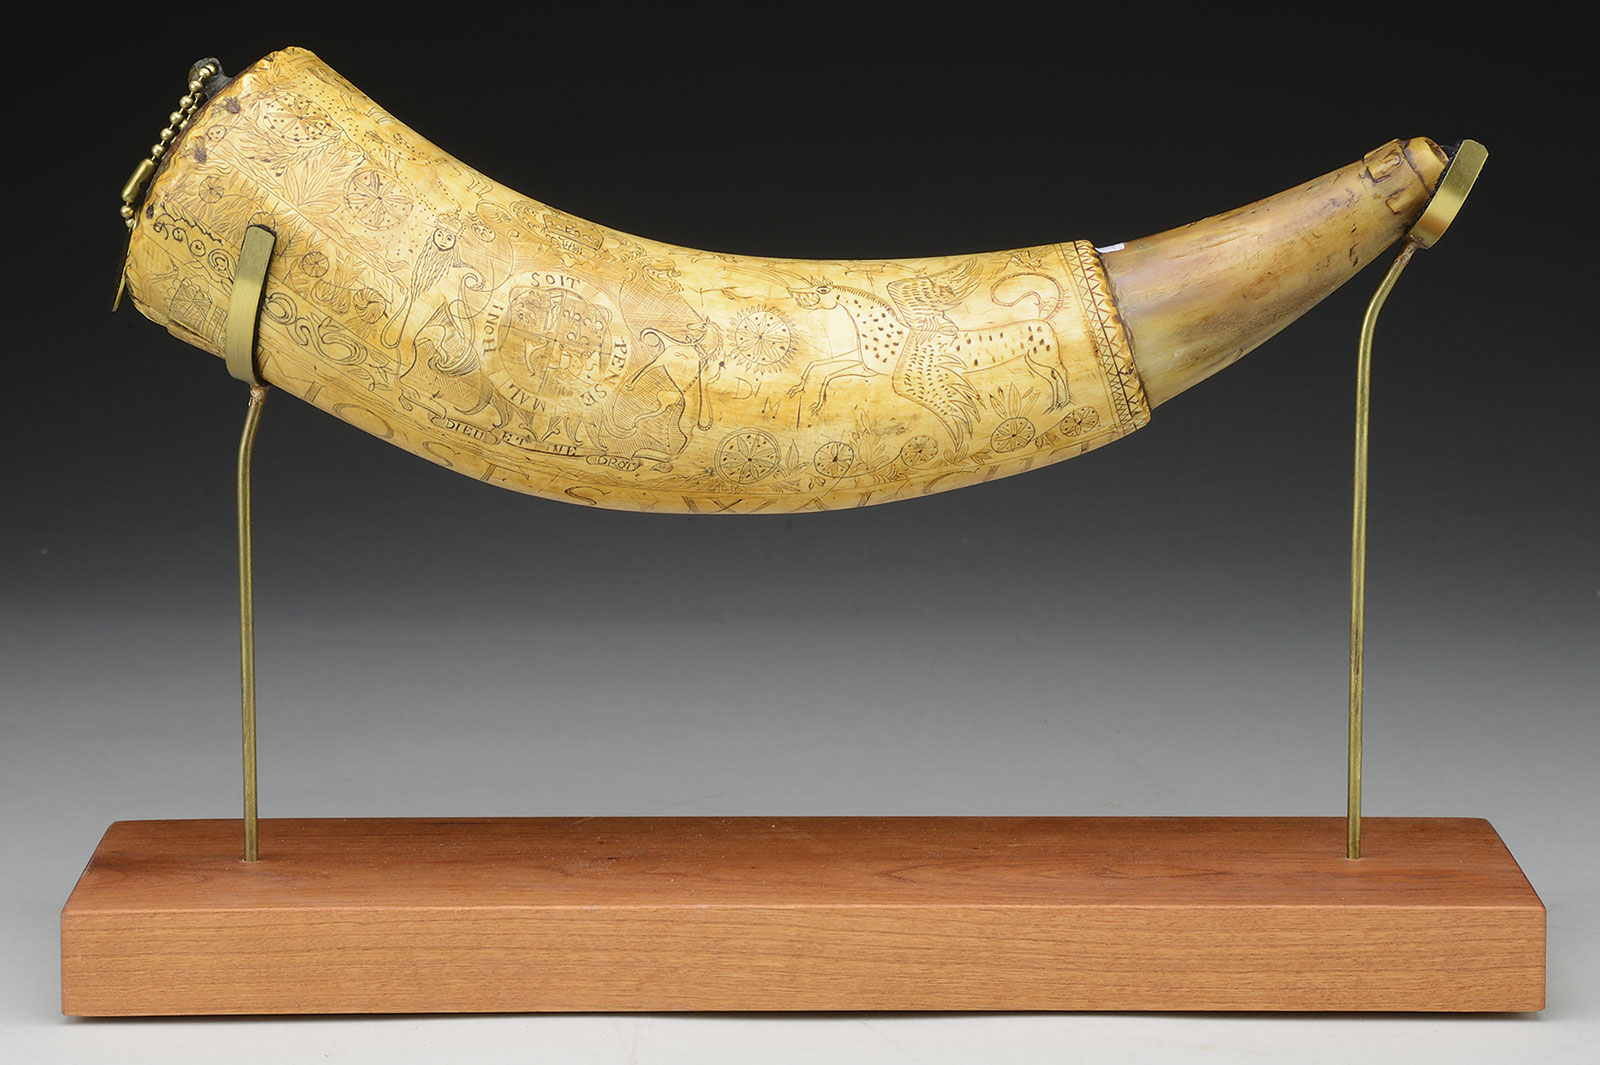 Fine Identified French and Indian War Powder Horn of Moses Walcut, Fort Edwards, 1758, estimated at $8,000-12,000.